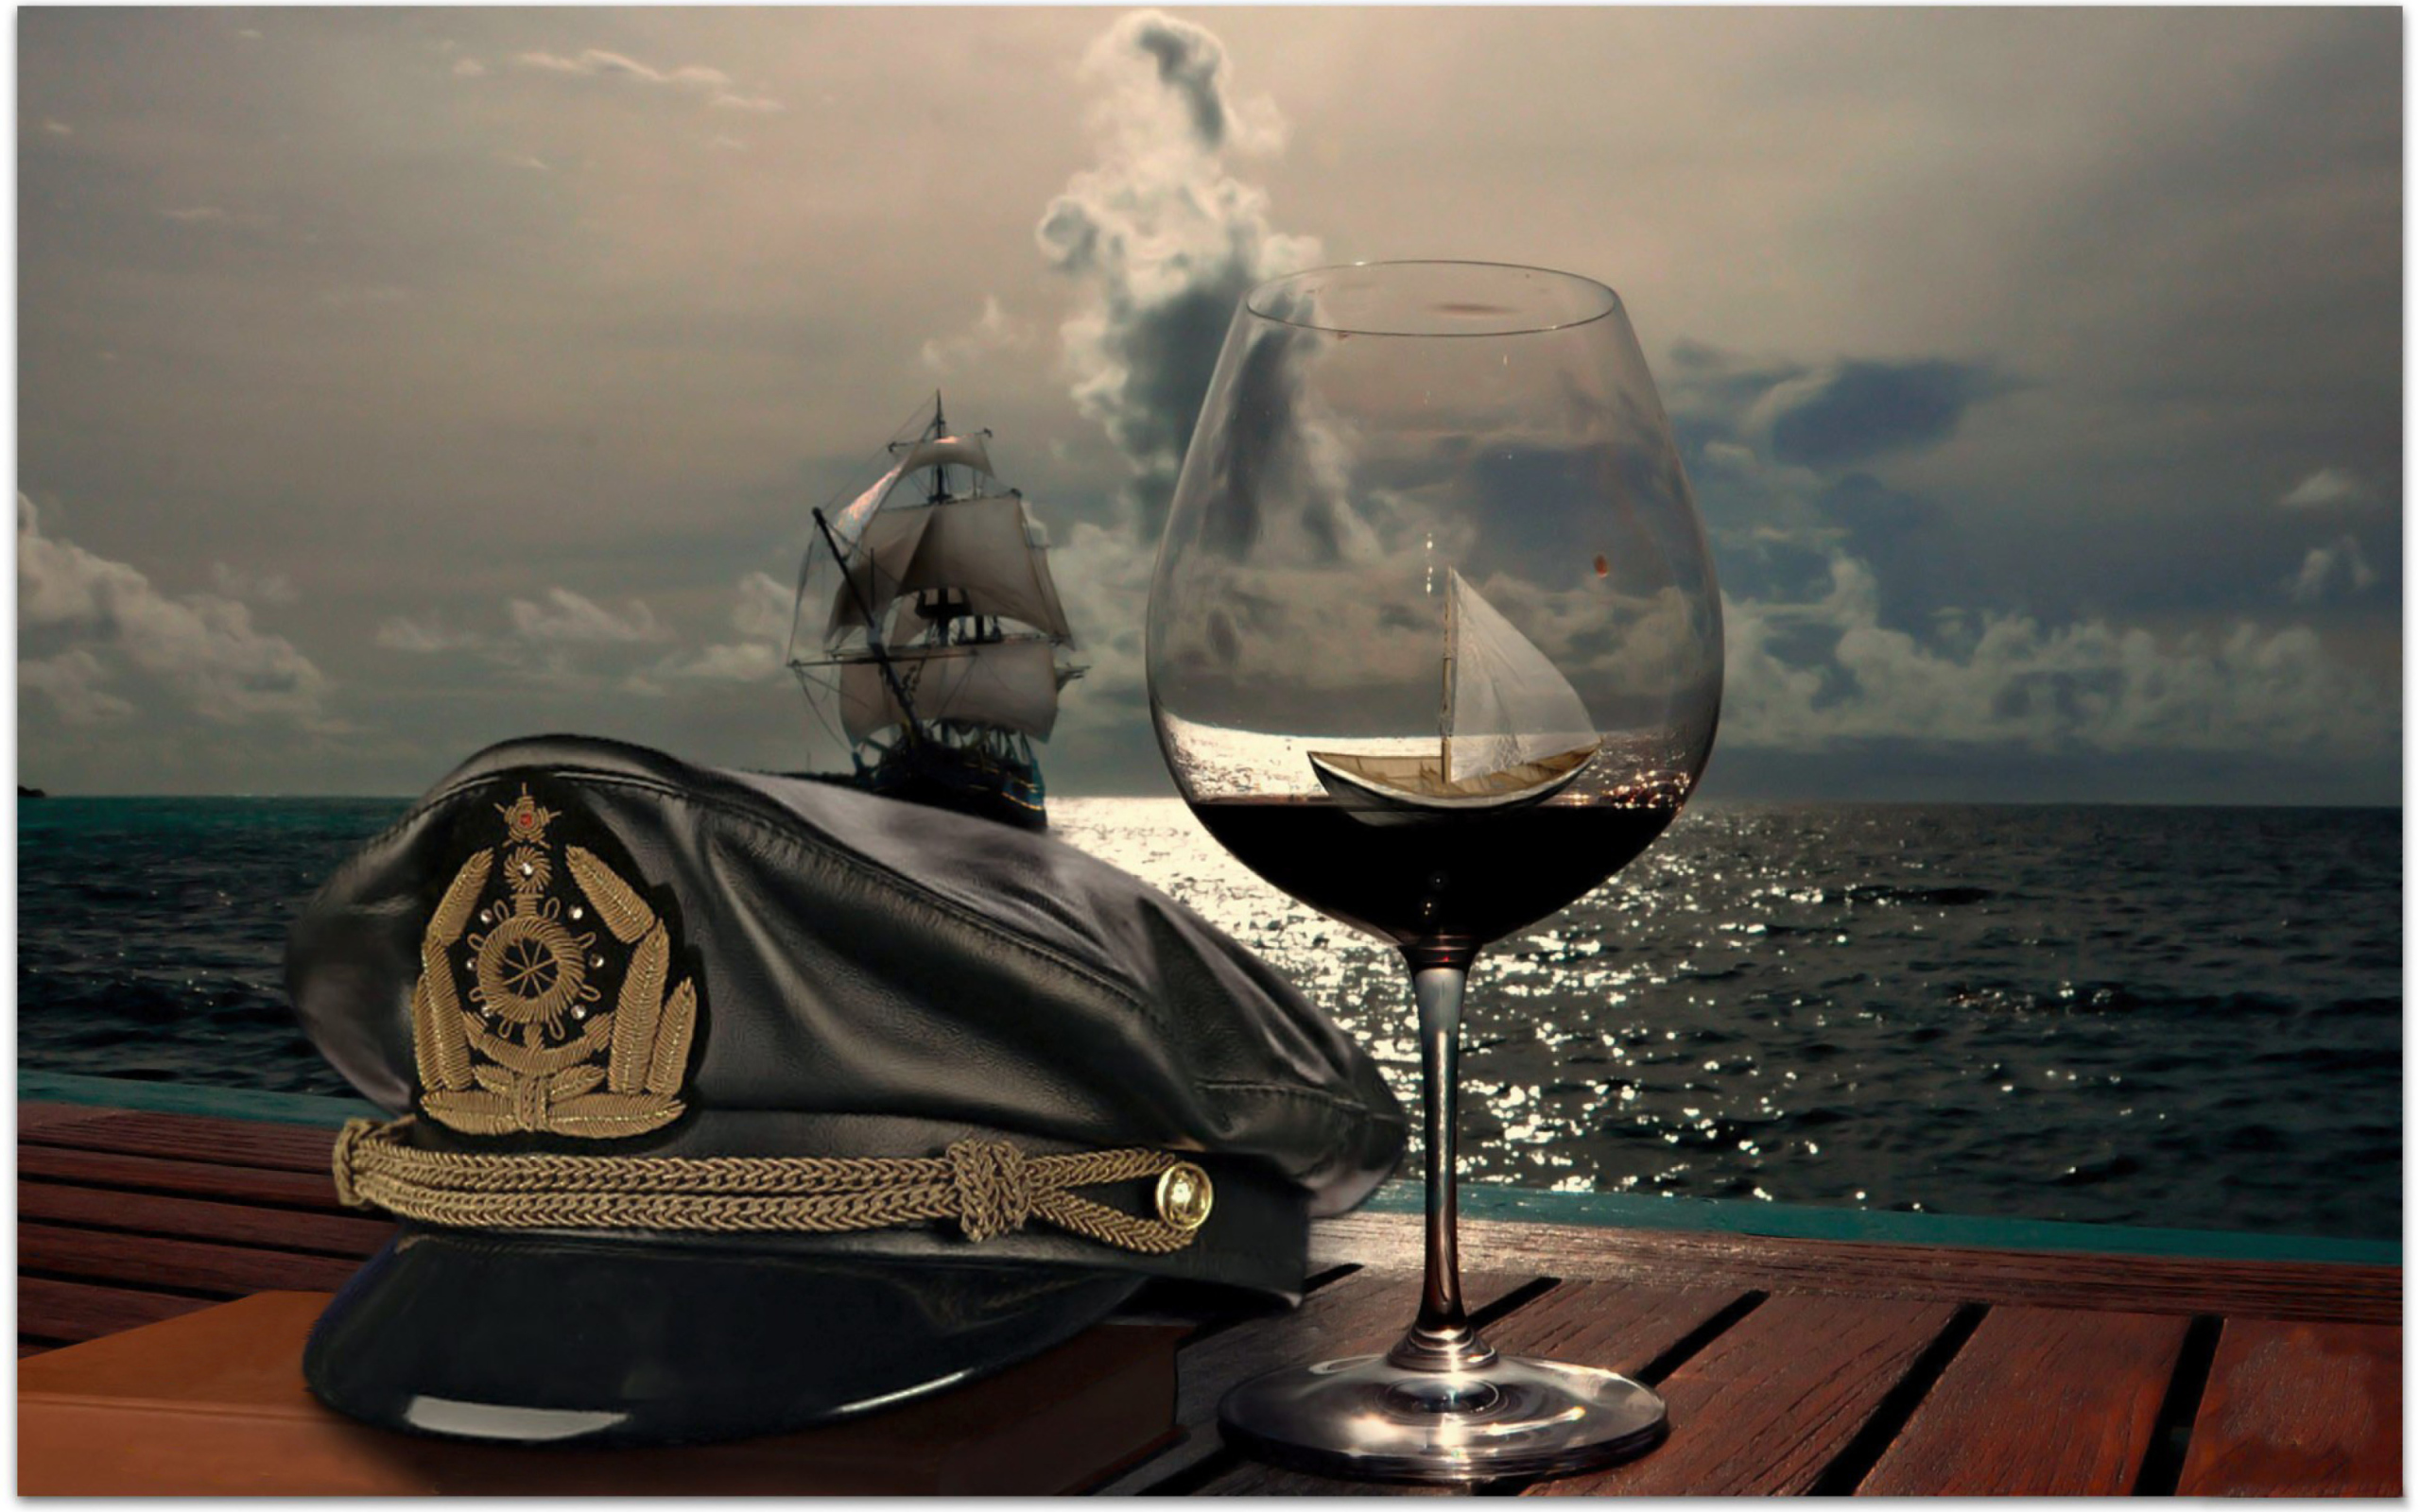 Ships In Sea And In Wine Glass wallpaper 2560x1600